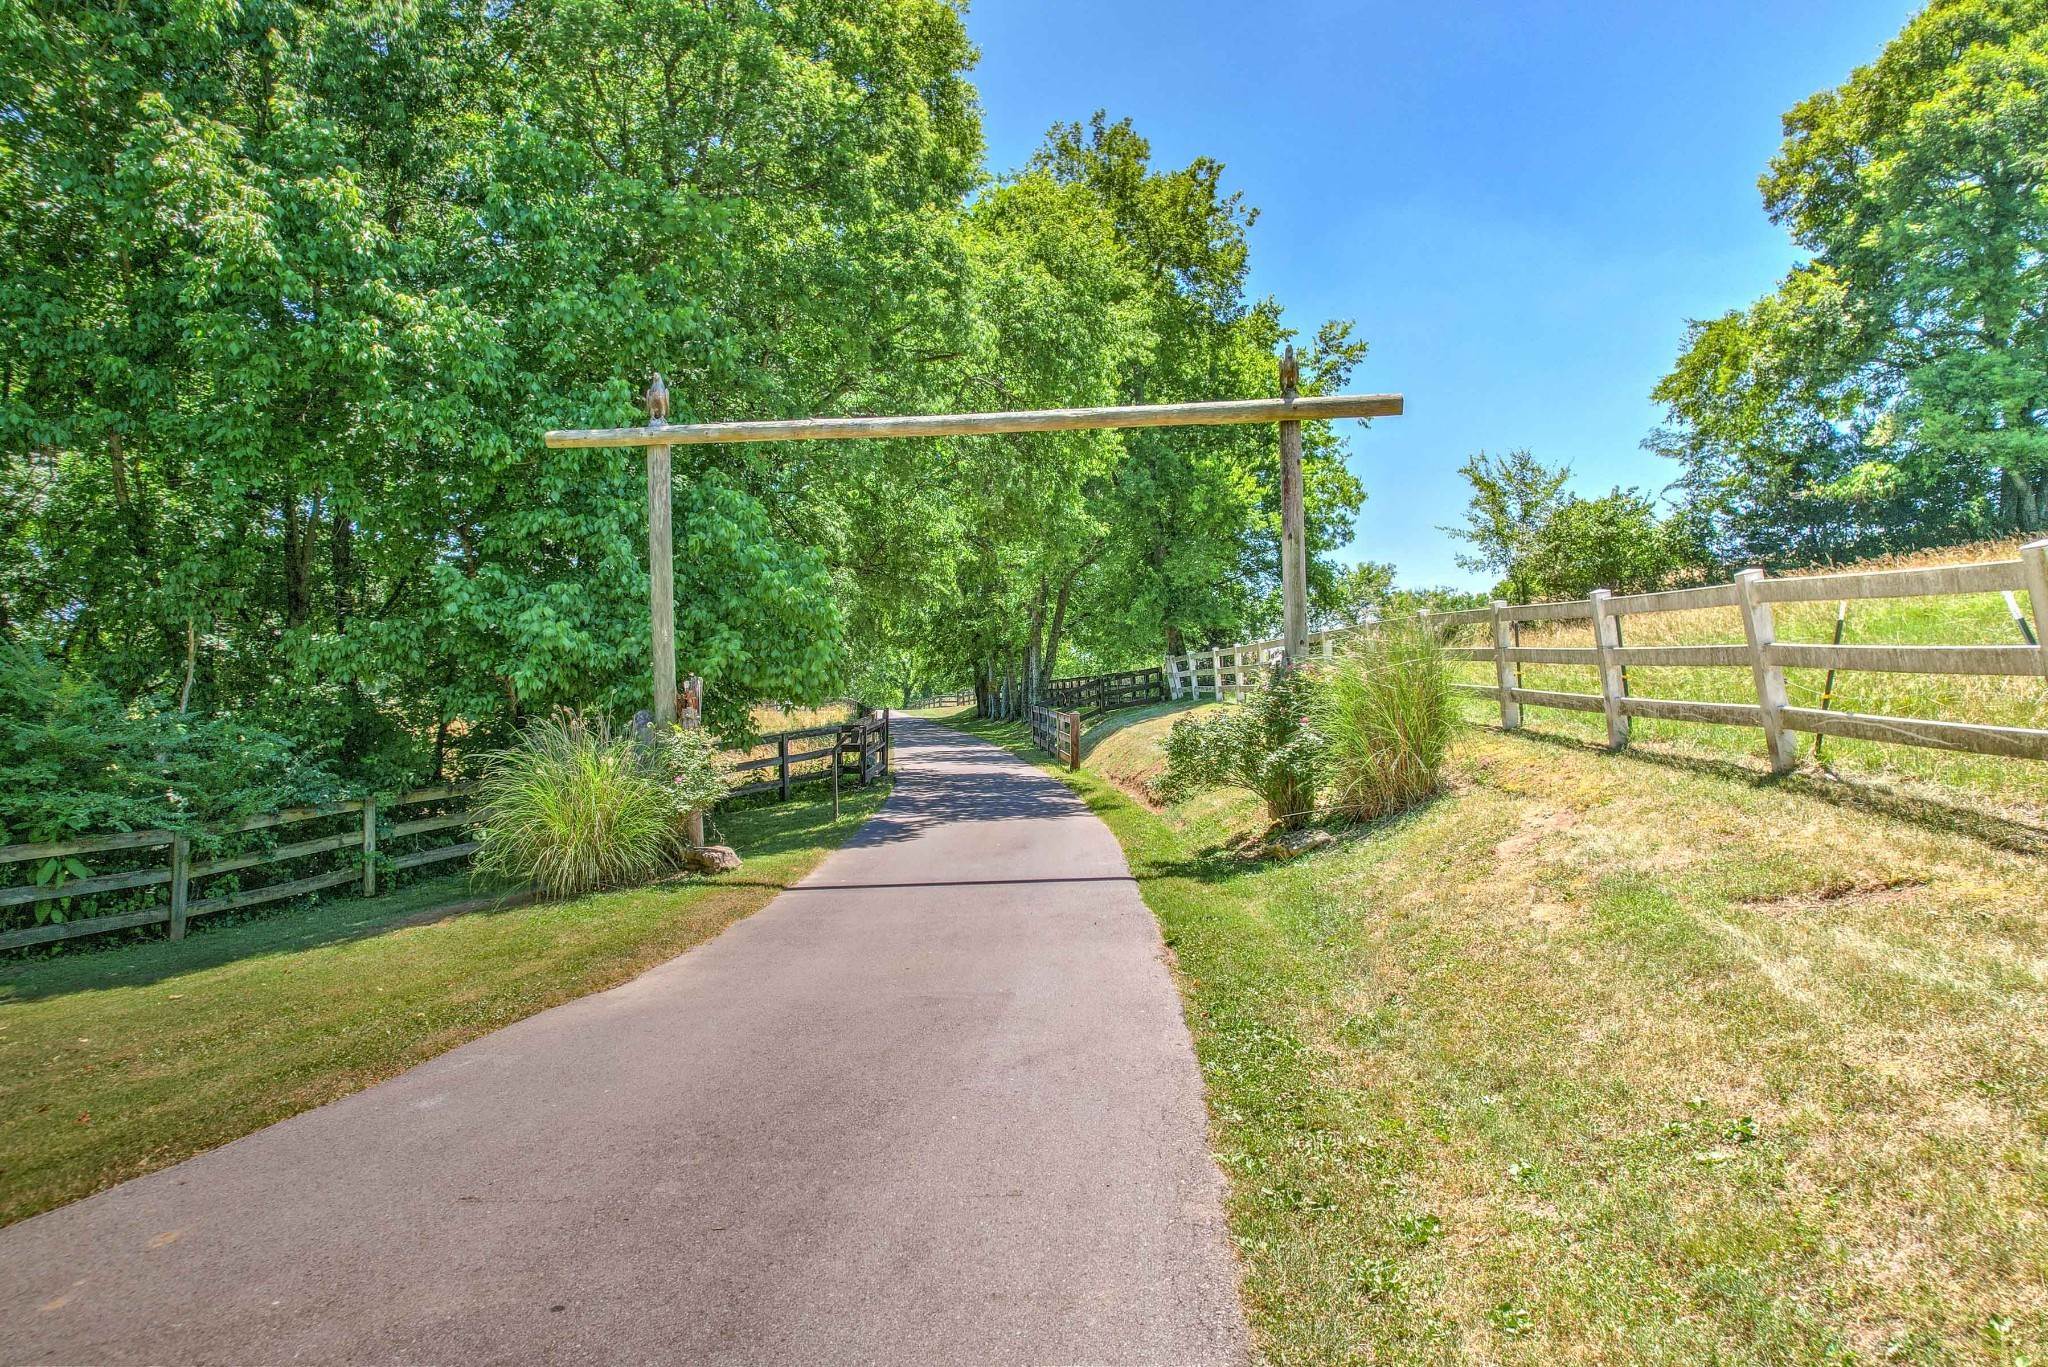 11. Land for Sale at 466 Moncrief Avenue Goodlettsville, Tennessee 37072 United States